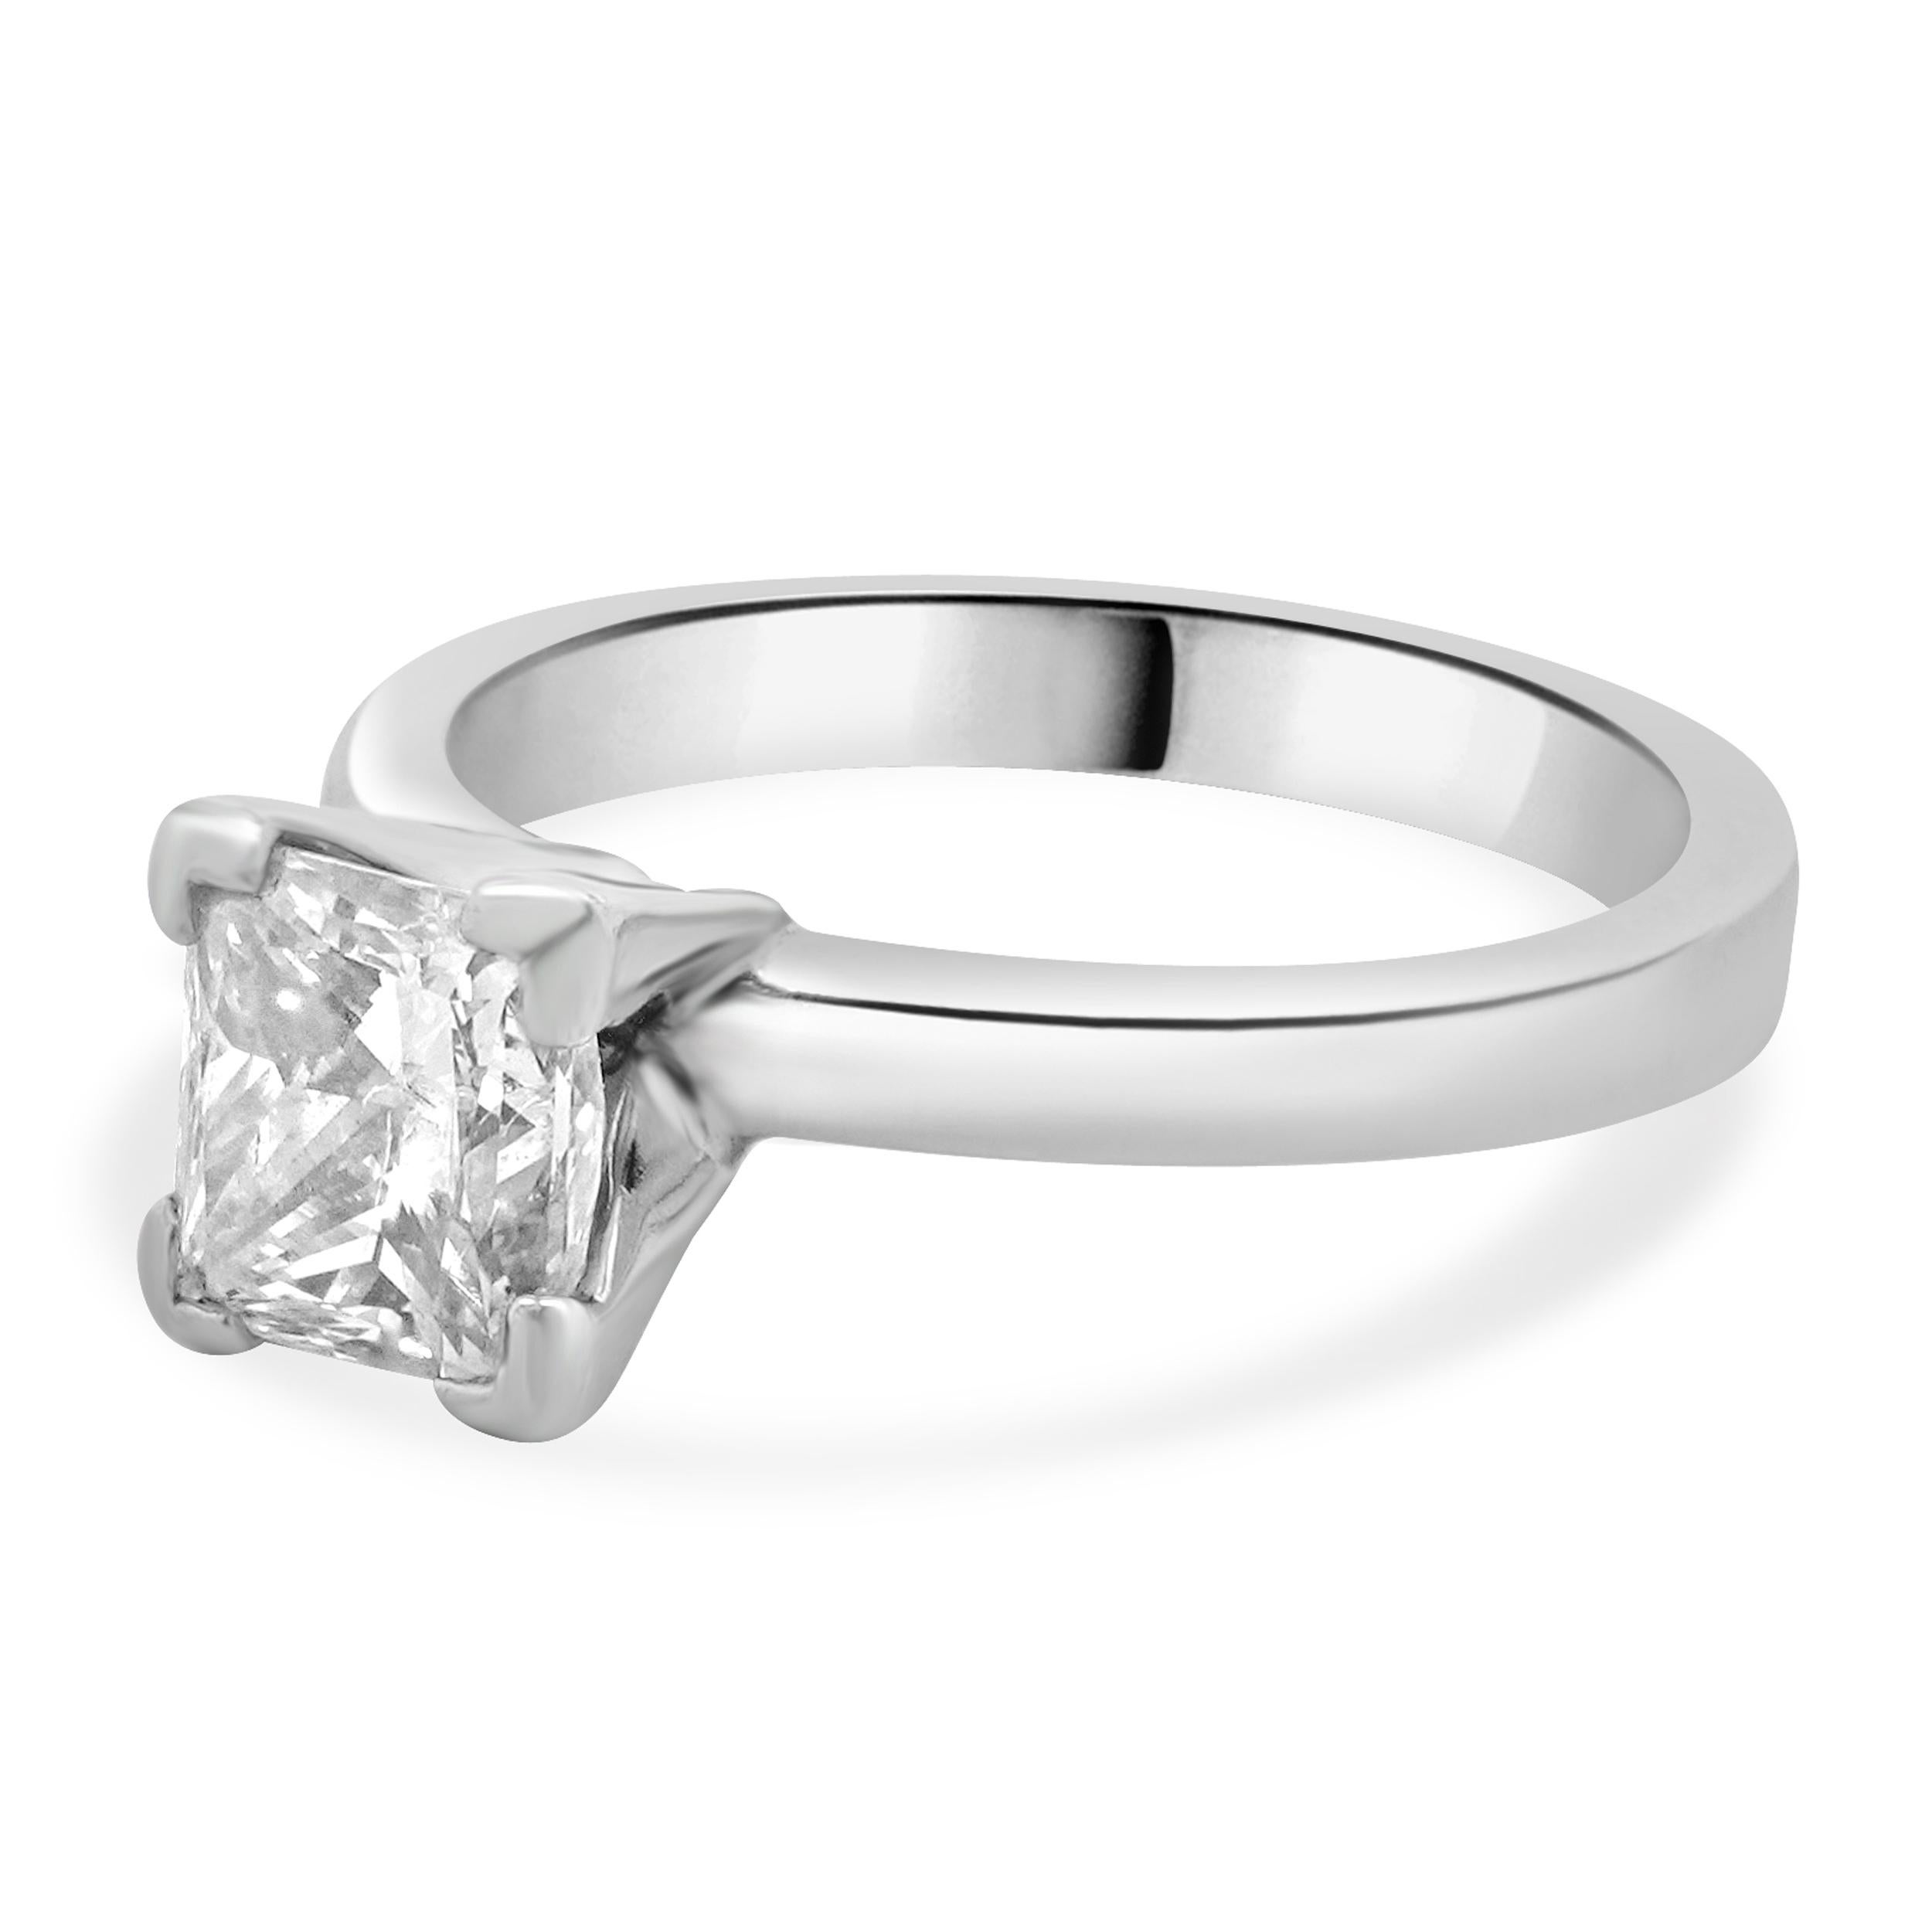 Designer: custom design
Material: platinum
Center Diamond: 1 princess cut = 1.16ct
Color : J
Clarity : SI3
Dimensions: ring top measures 7mm
Size: 4.75 complimentary sizing available 
Weight: 4.80 grams
